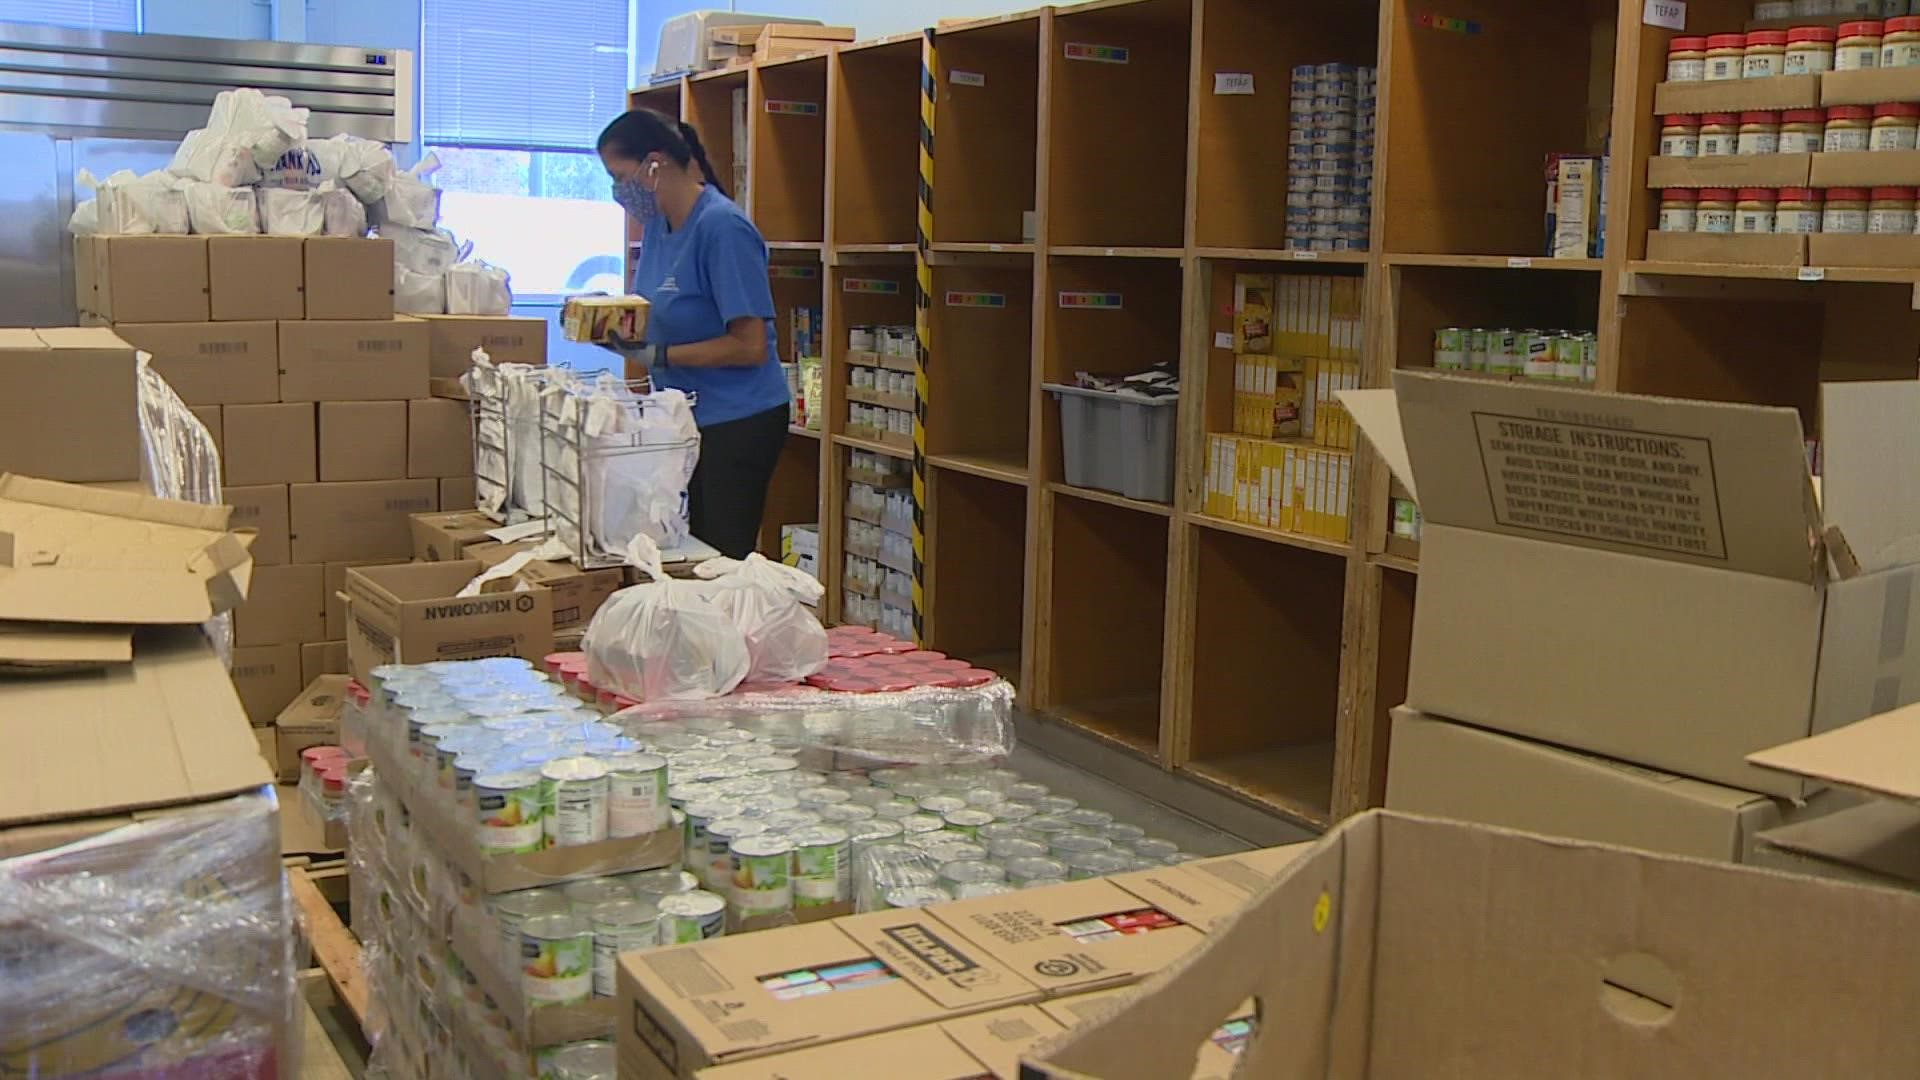 Volunteers of America in Snohomish County is cutting its distribution by 50%.